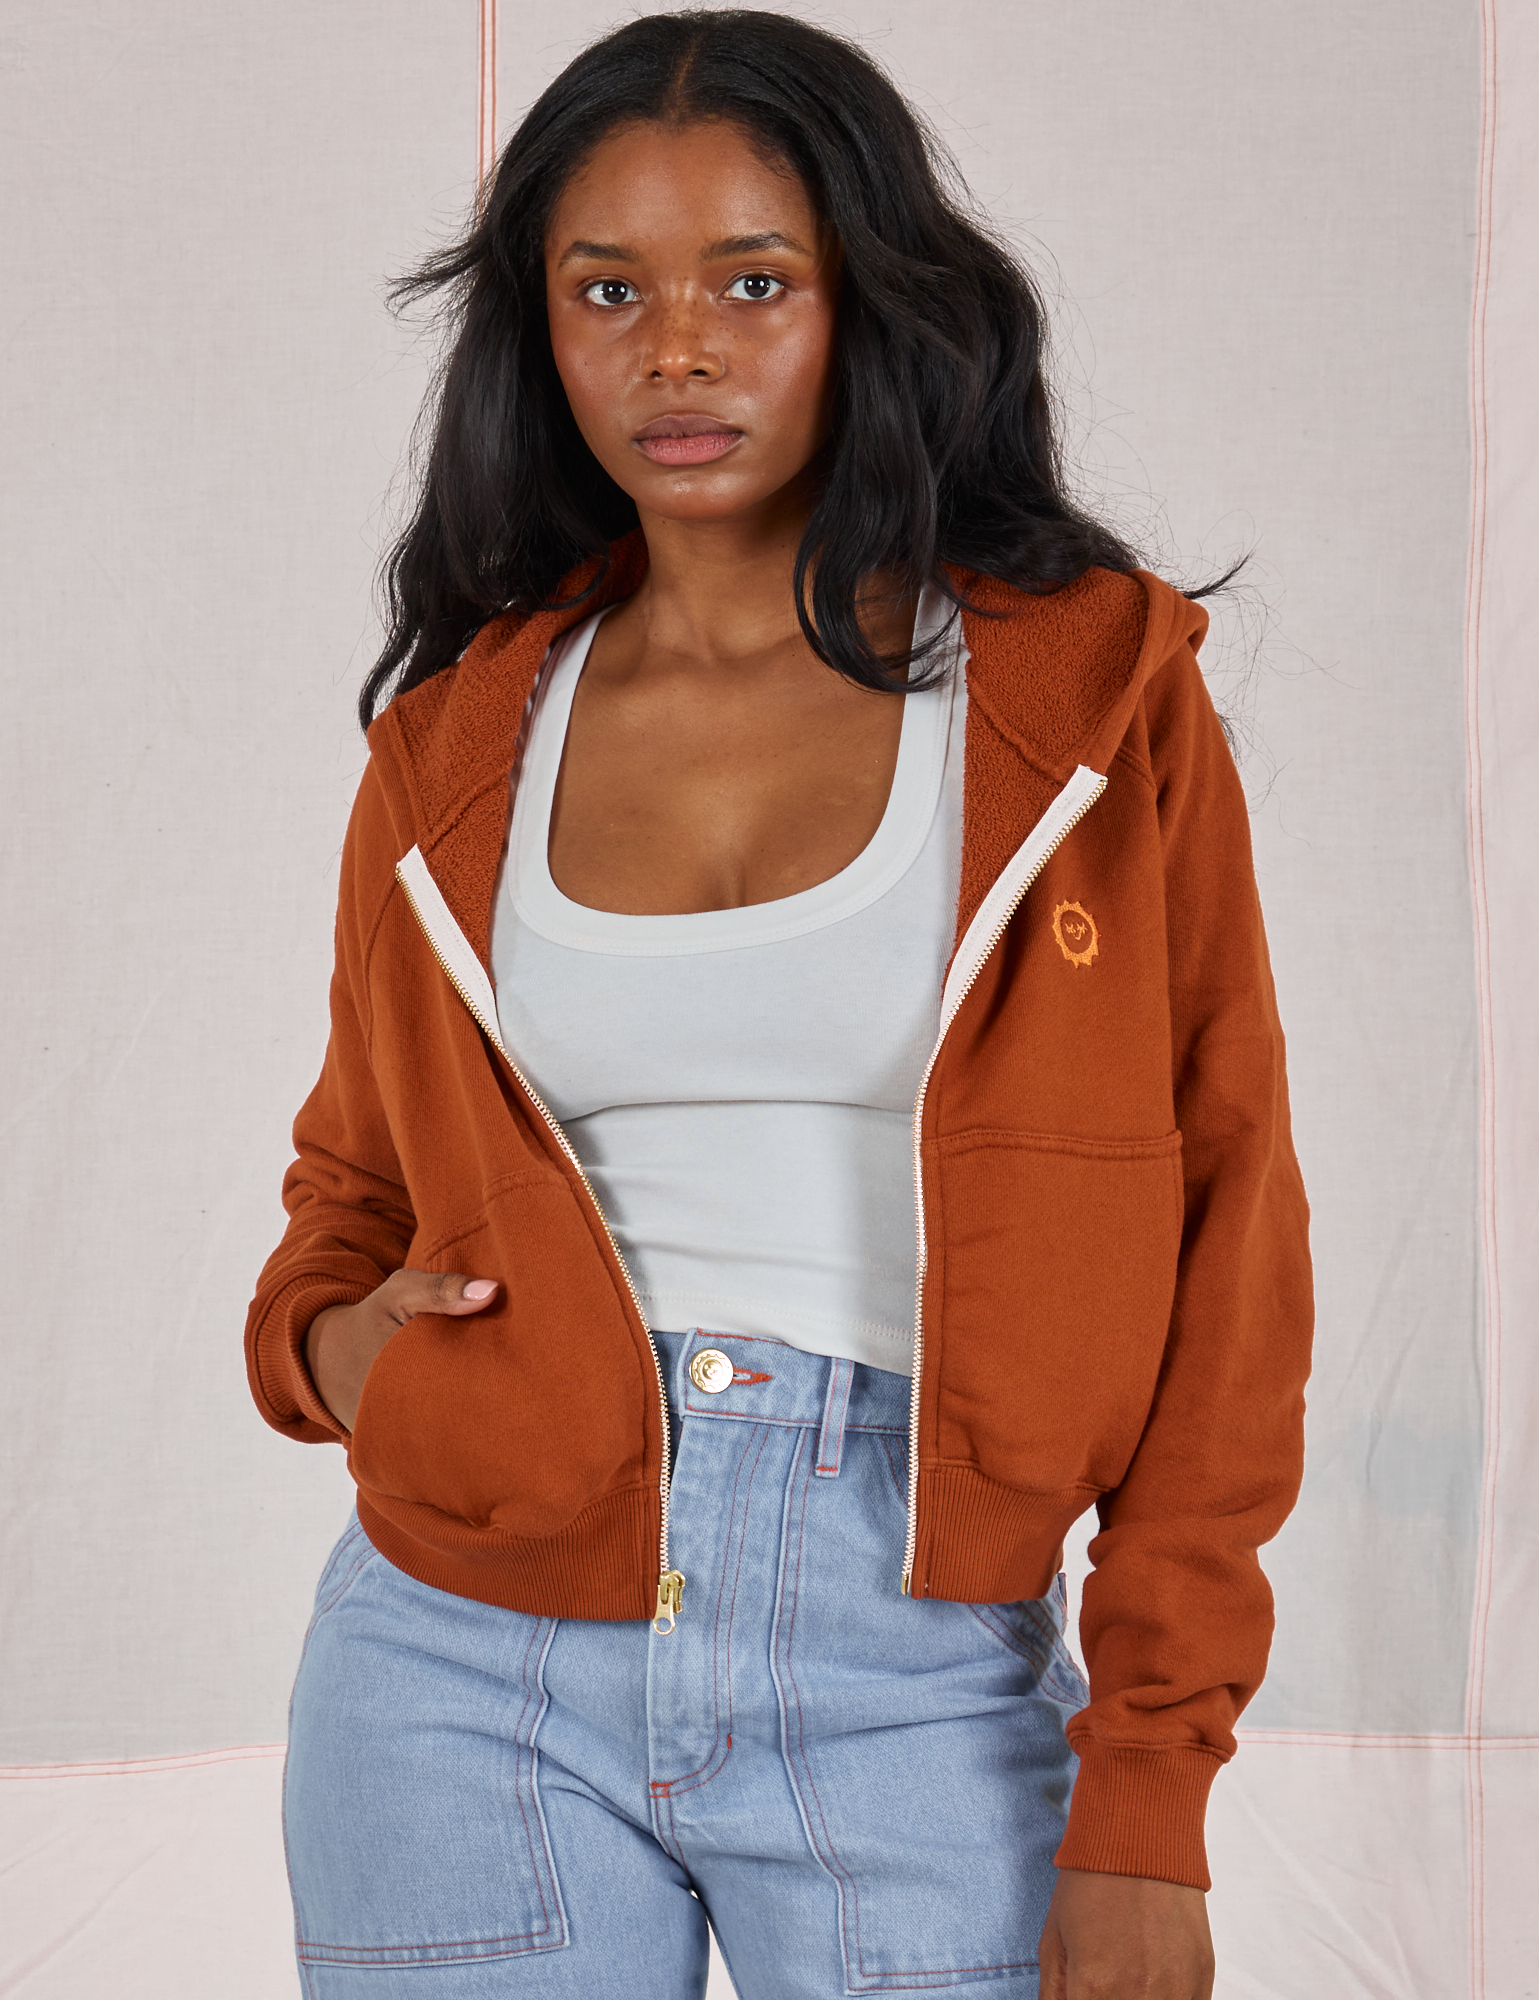 Kandia is 5'3" and wearing P Cropped Zip Hoodie in Burnt Terracotta paired with a vintage off-white Cropped Tank underneath